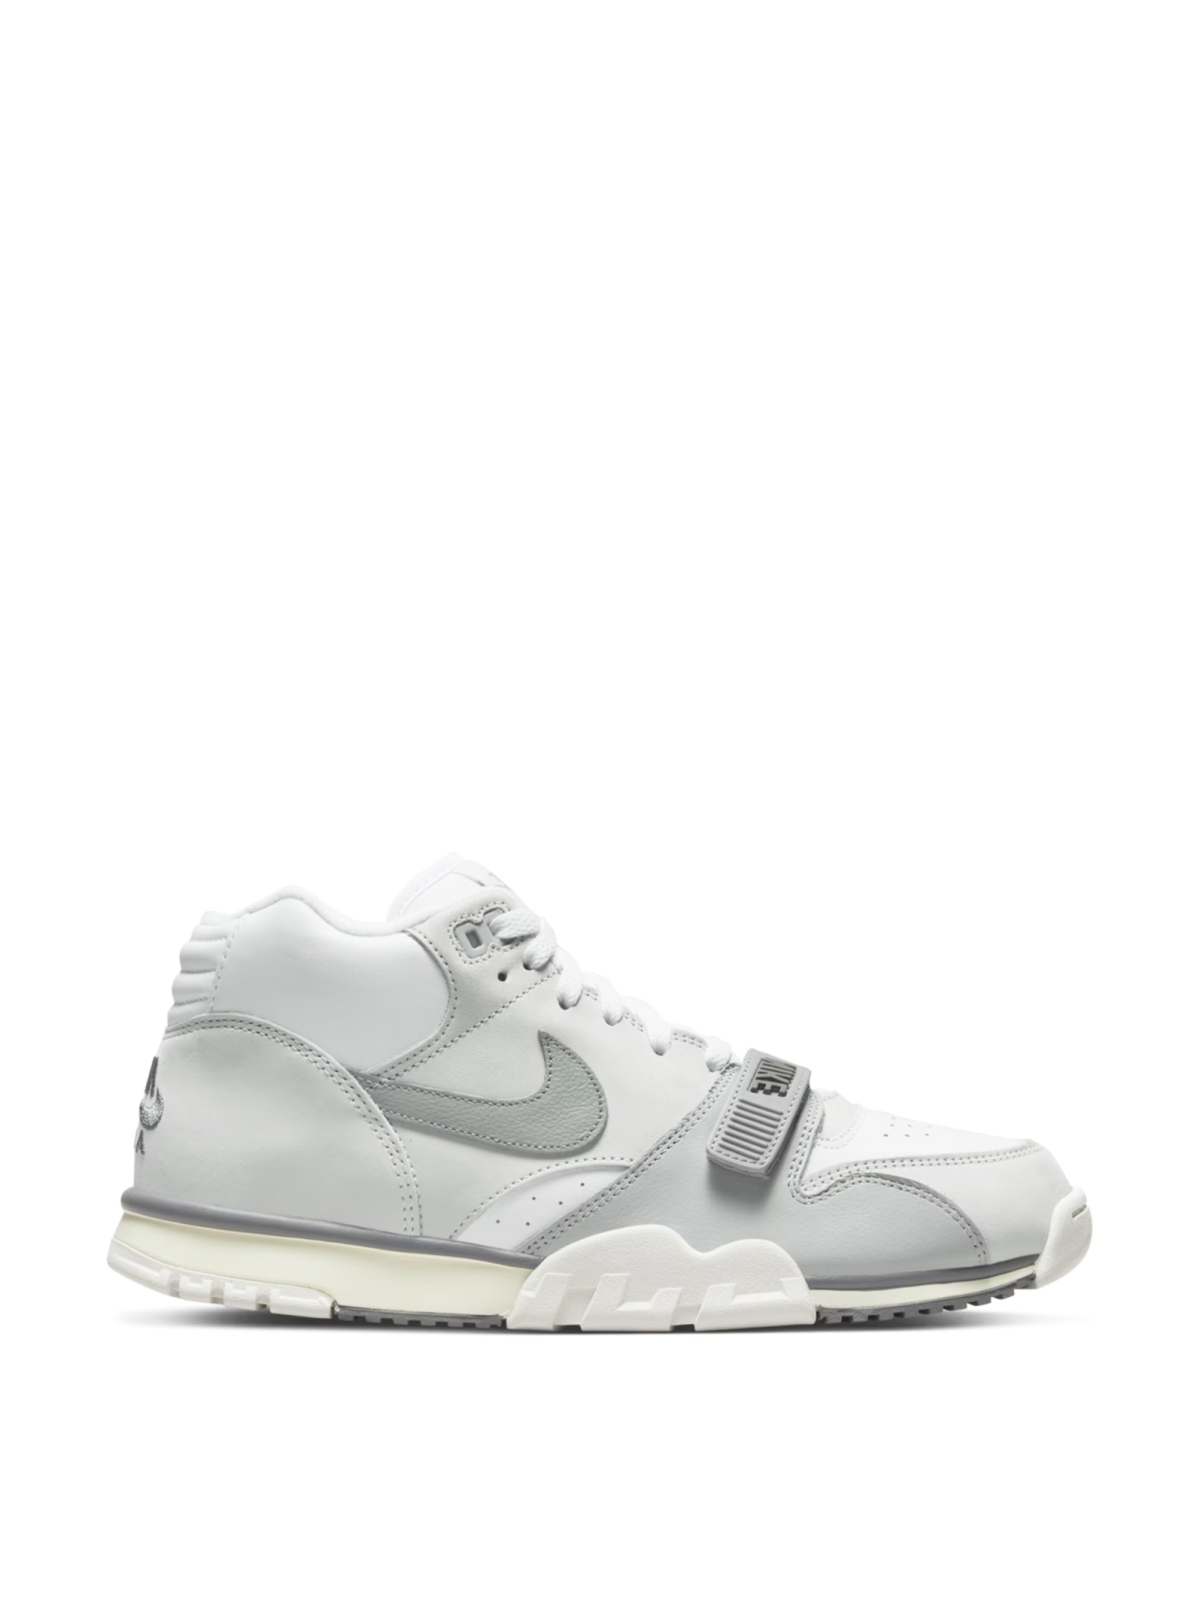 Air Trainer 1 Photon Dust Sneakers